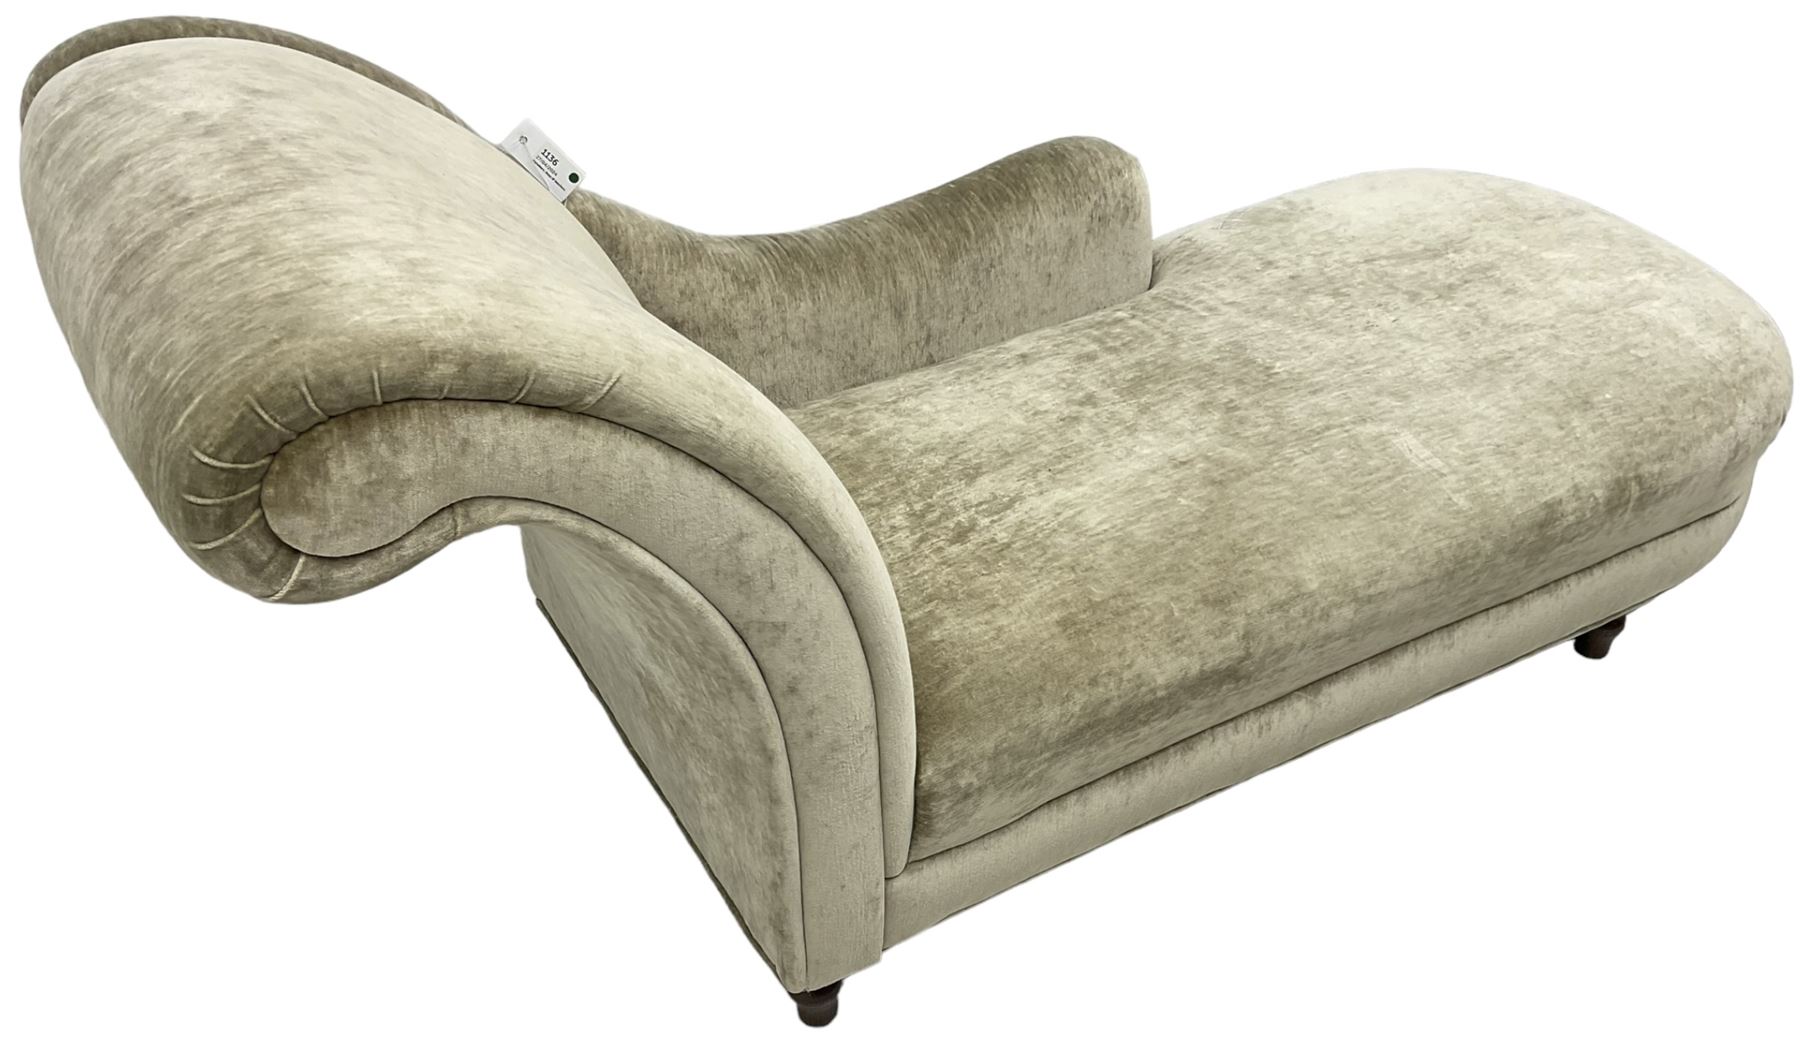 Contemporary chaise longue with scrolled back - Image 6 of 8